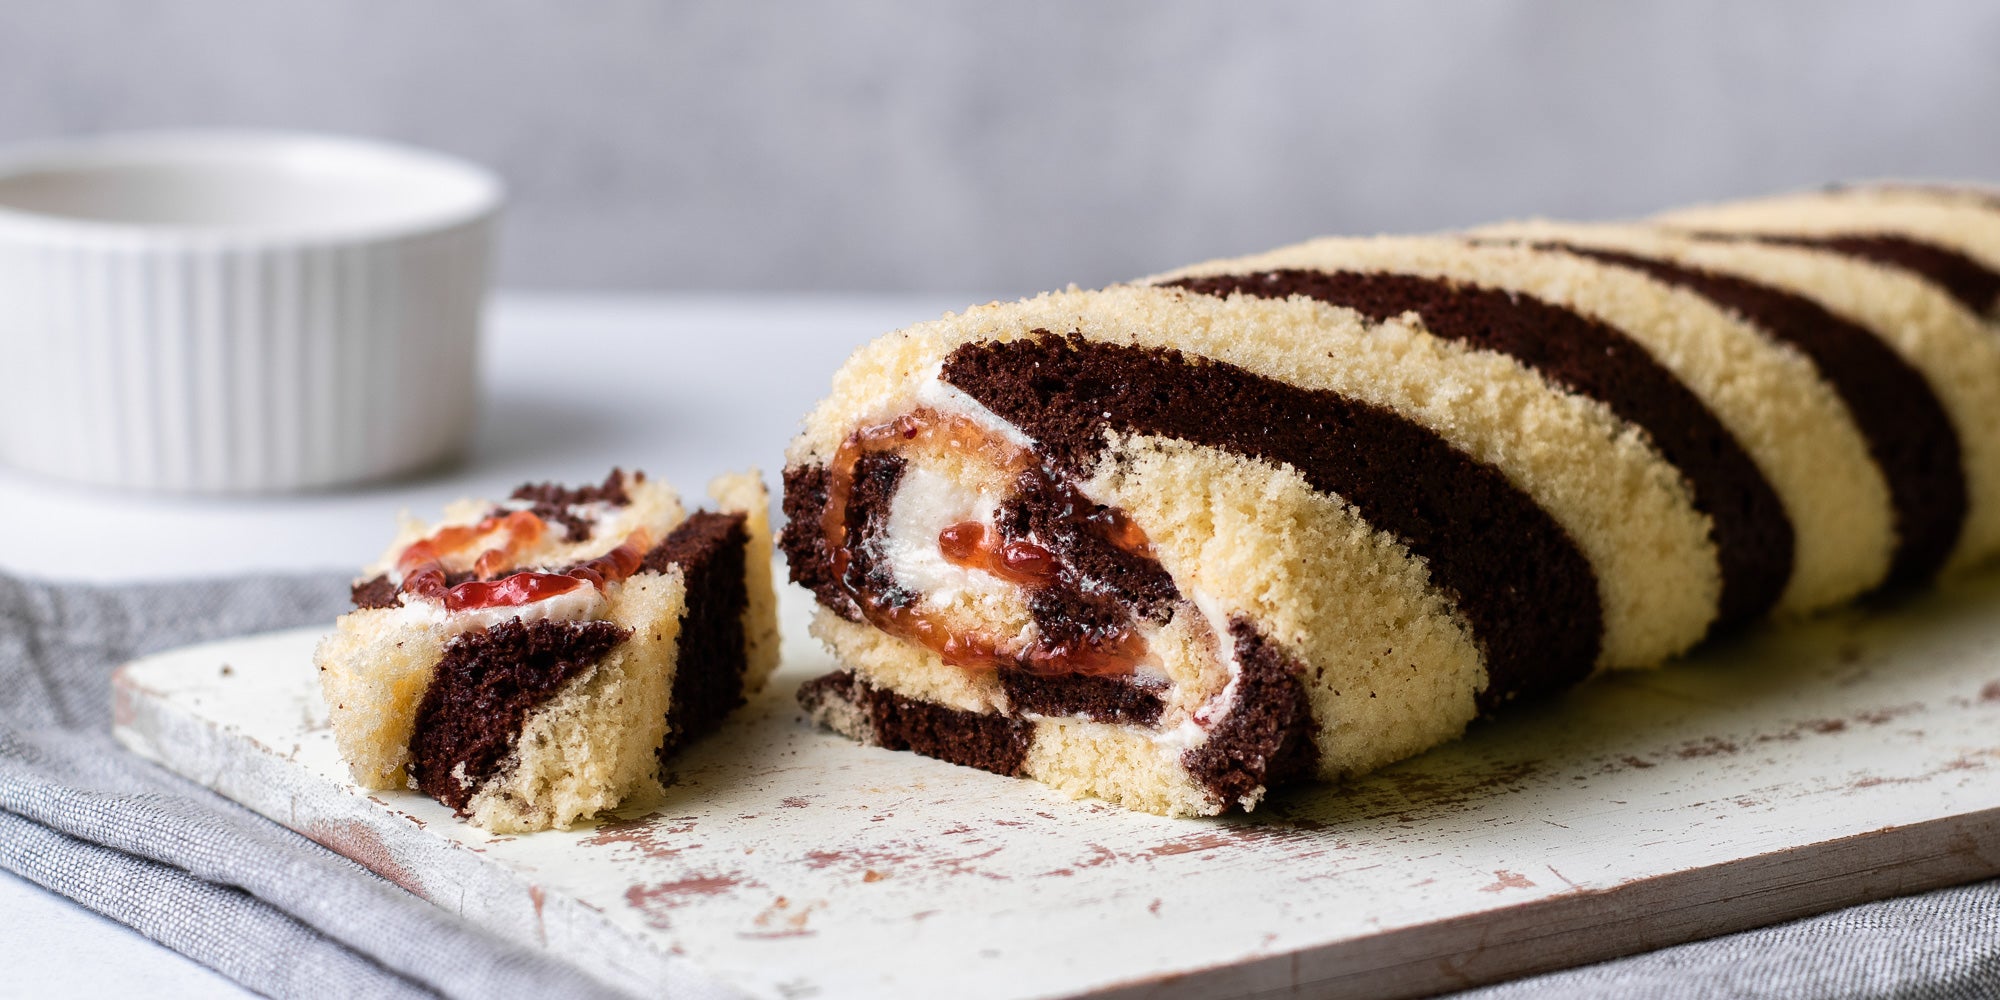 Close up Chocolate & Vanilla Swiss Roll with a slice cut out, showing the raspberry jam filling